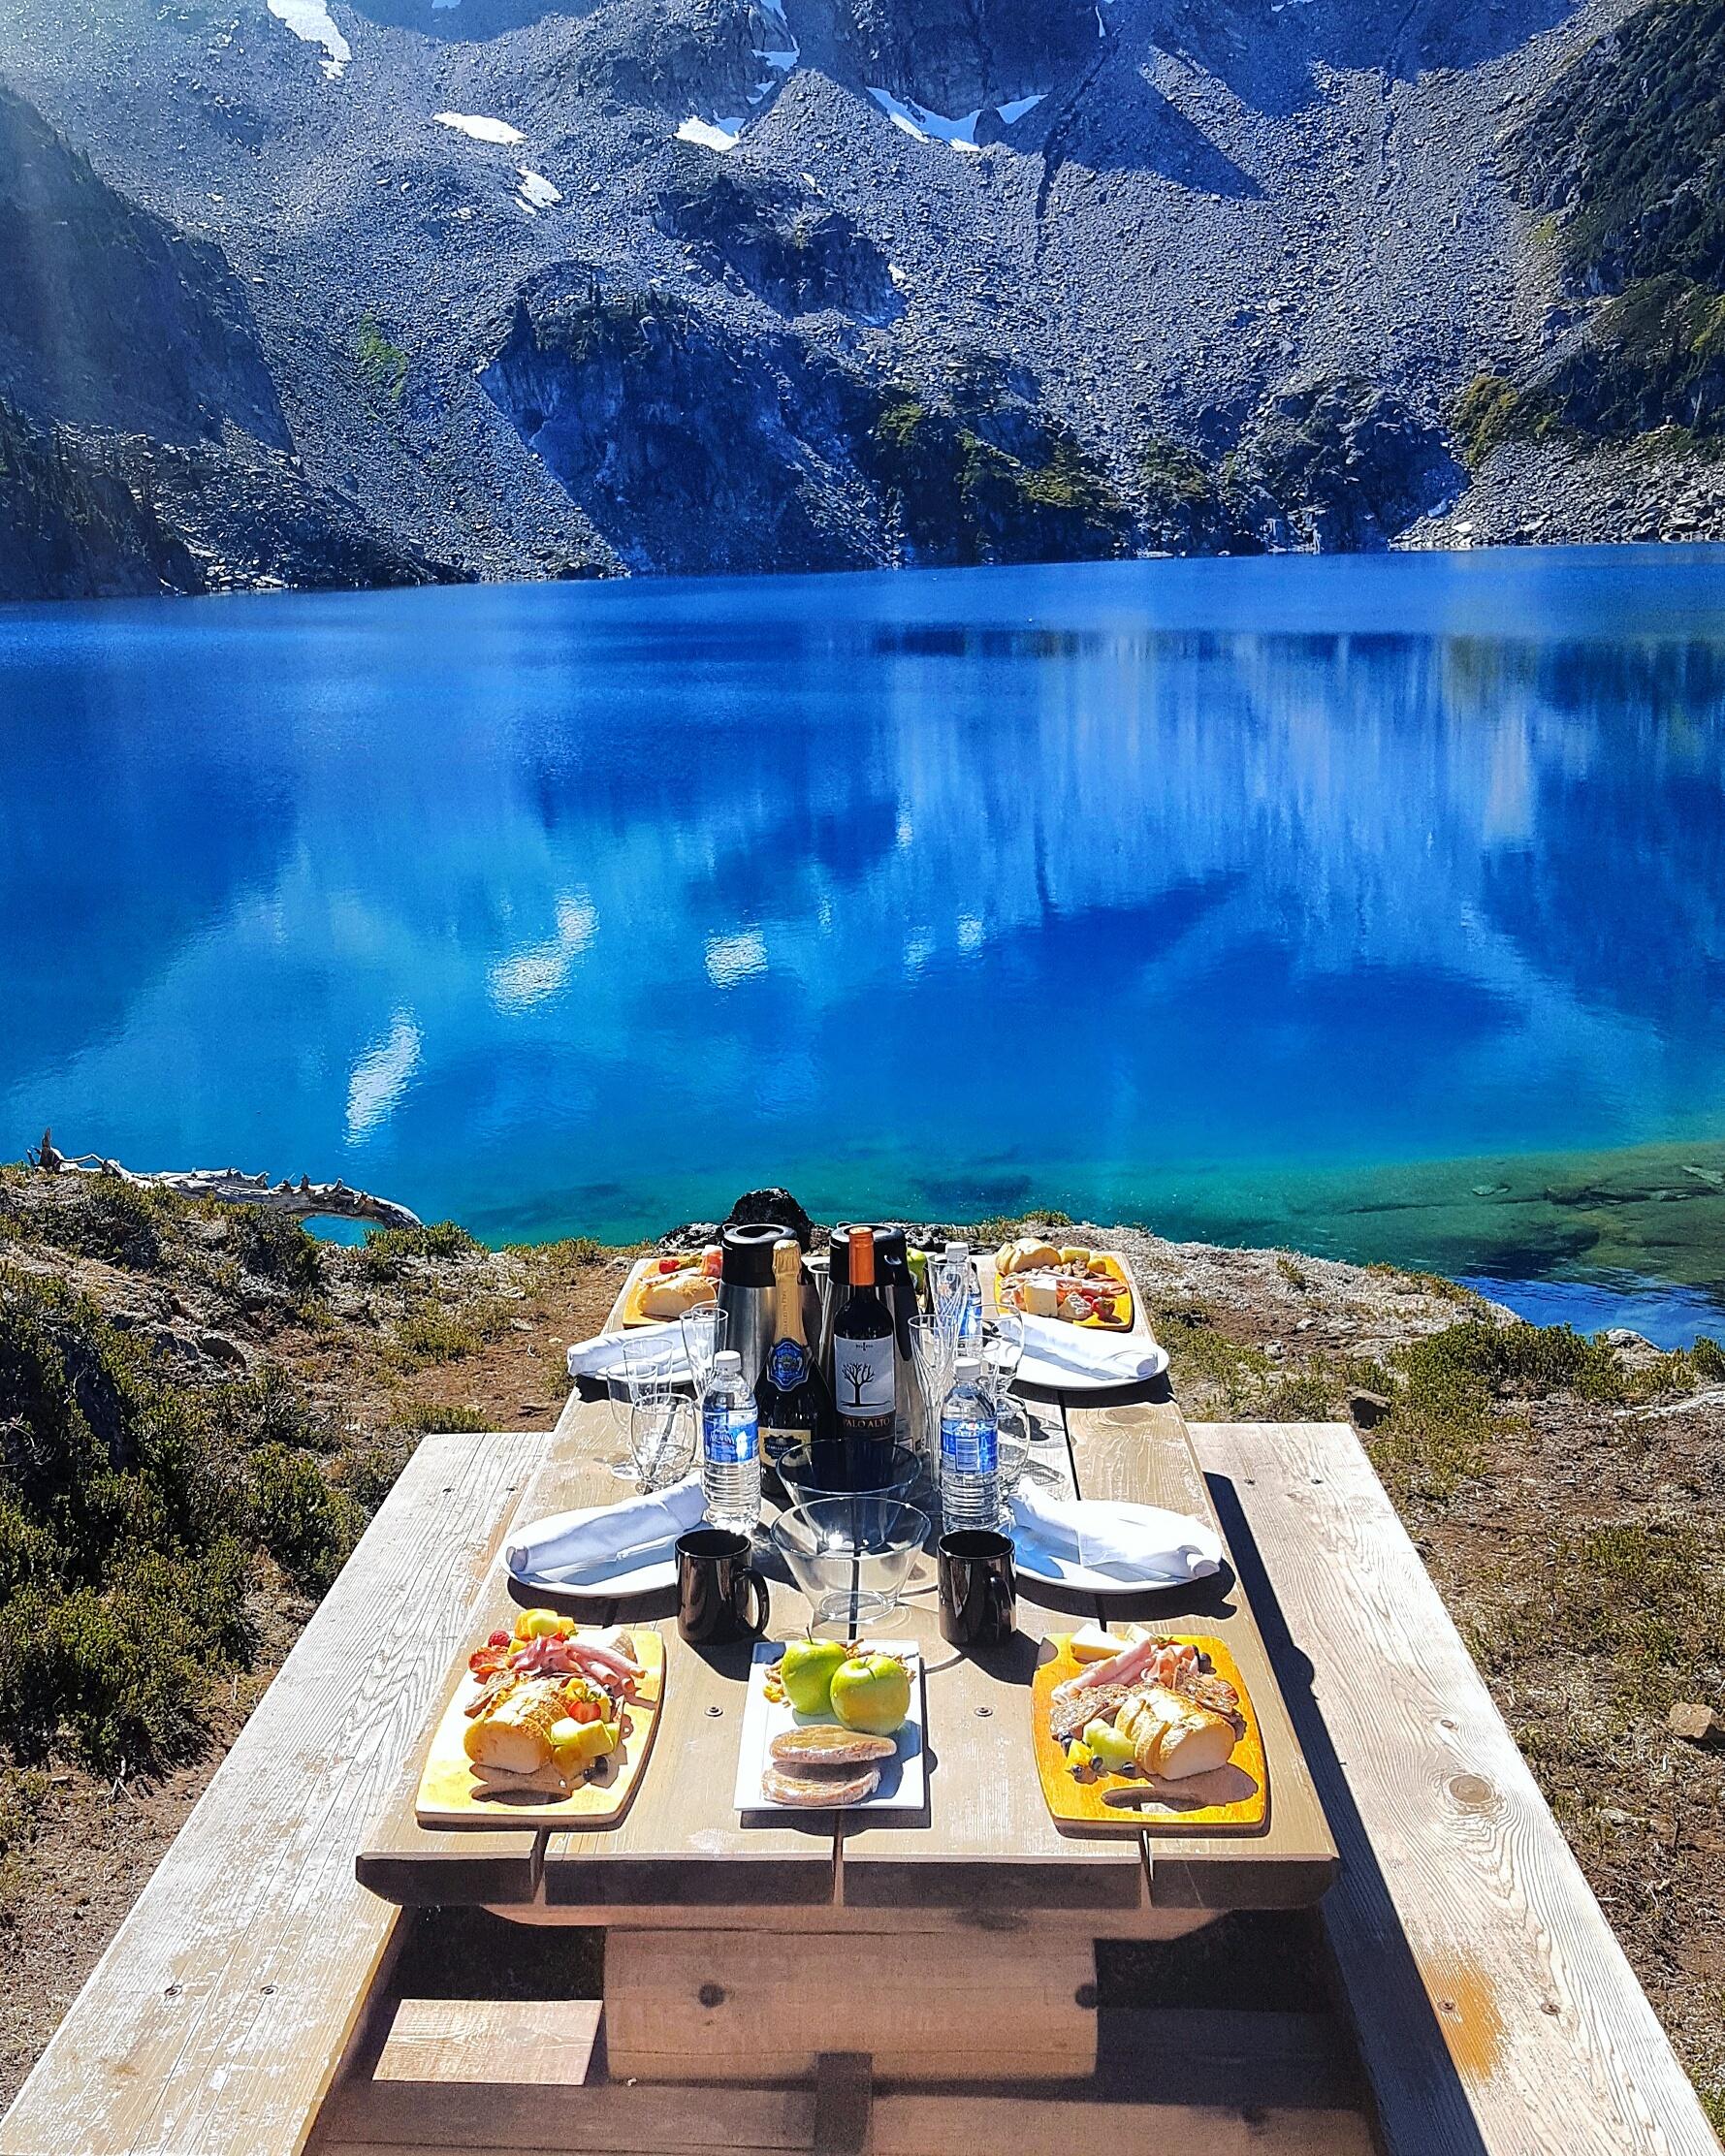 An elegant meal laid out on a picnic table, next to a blue lake at the bottom of a mountain